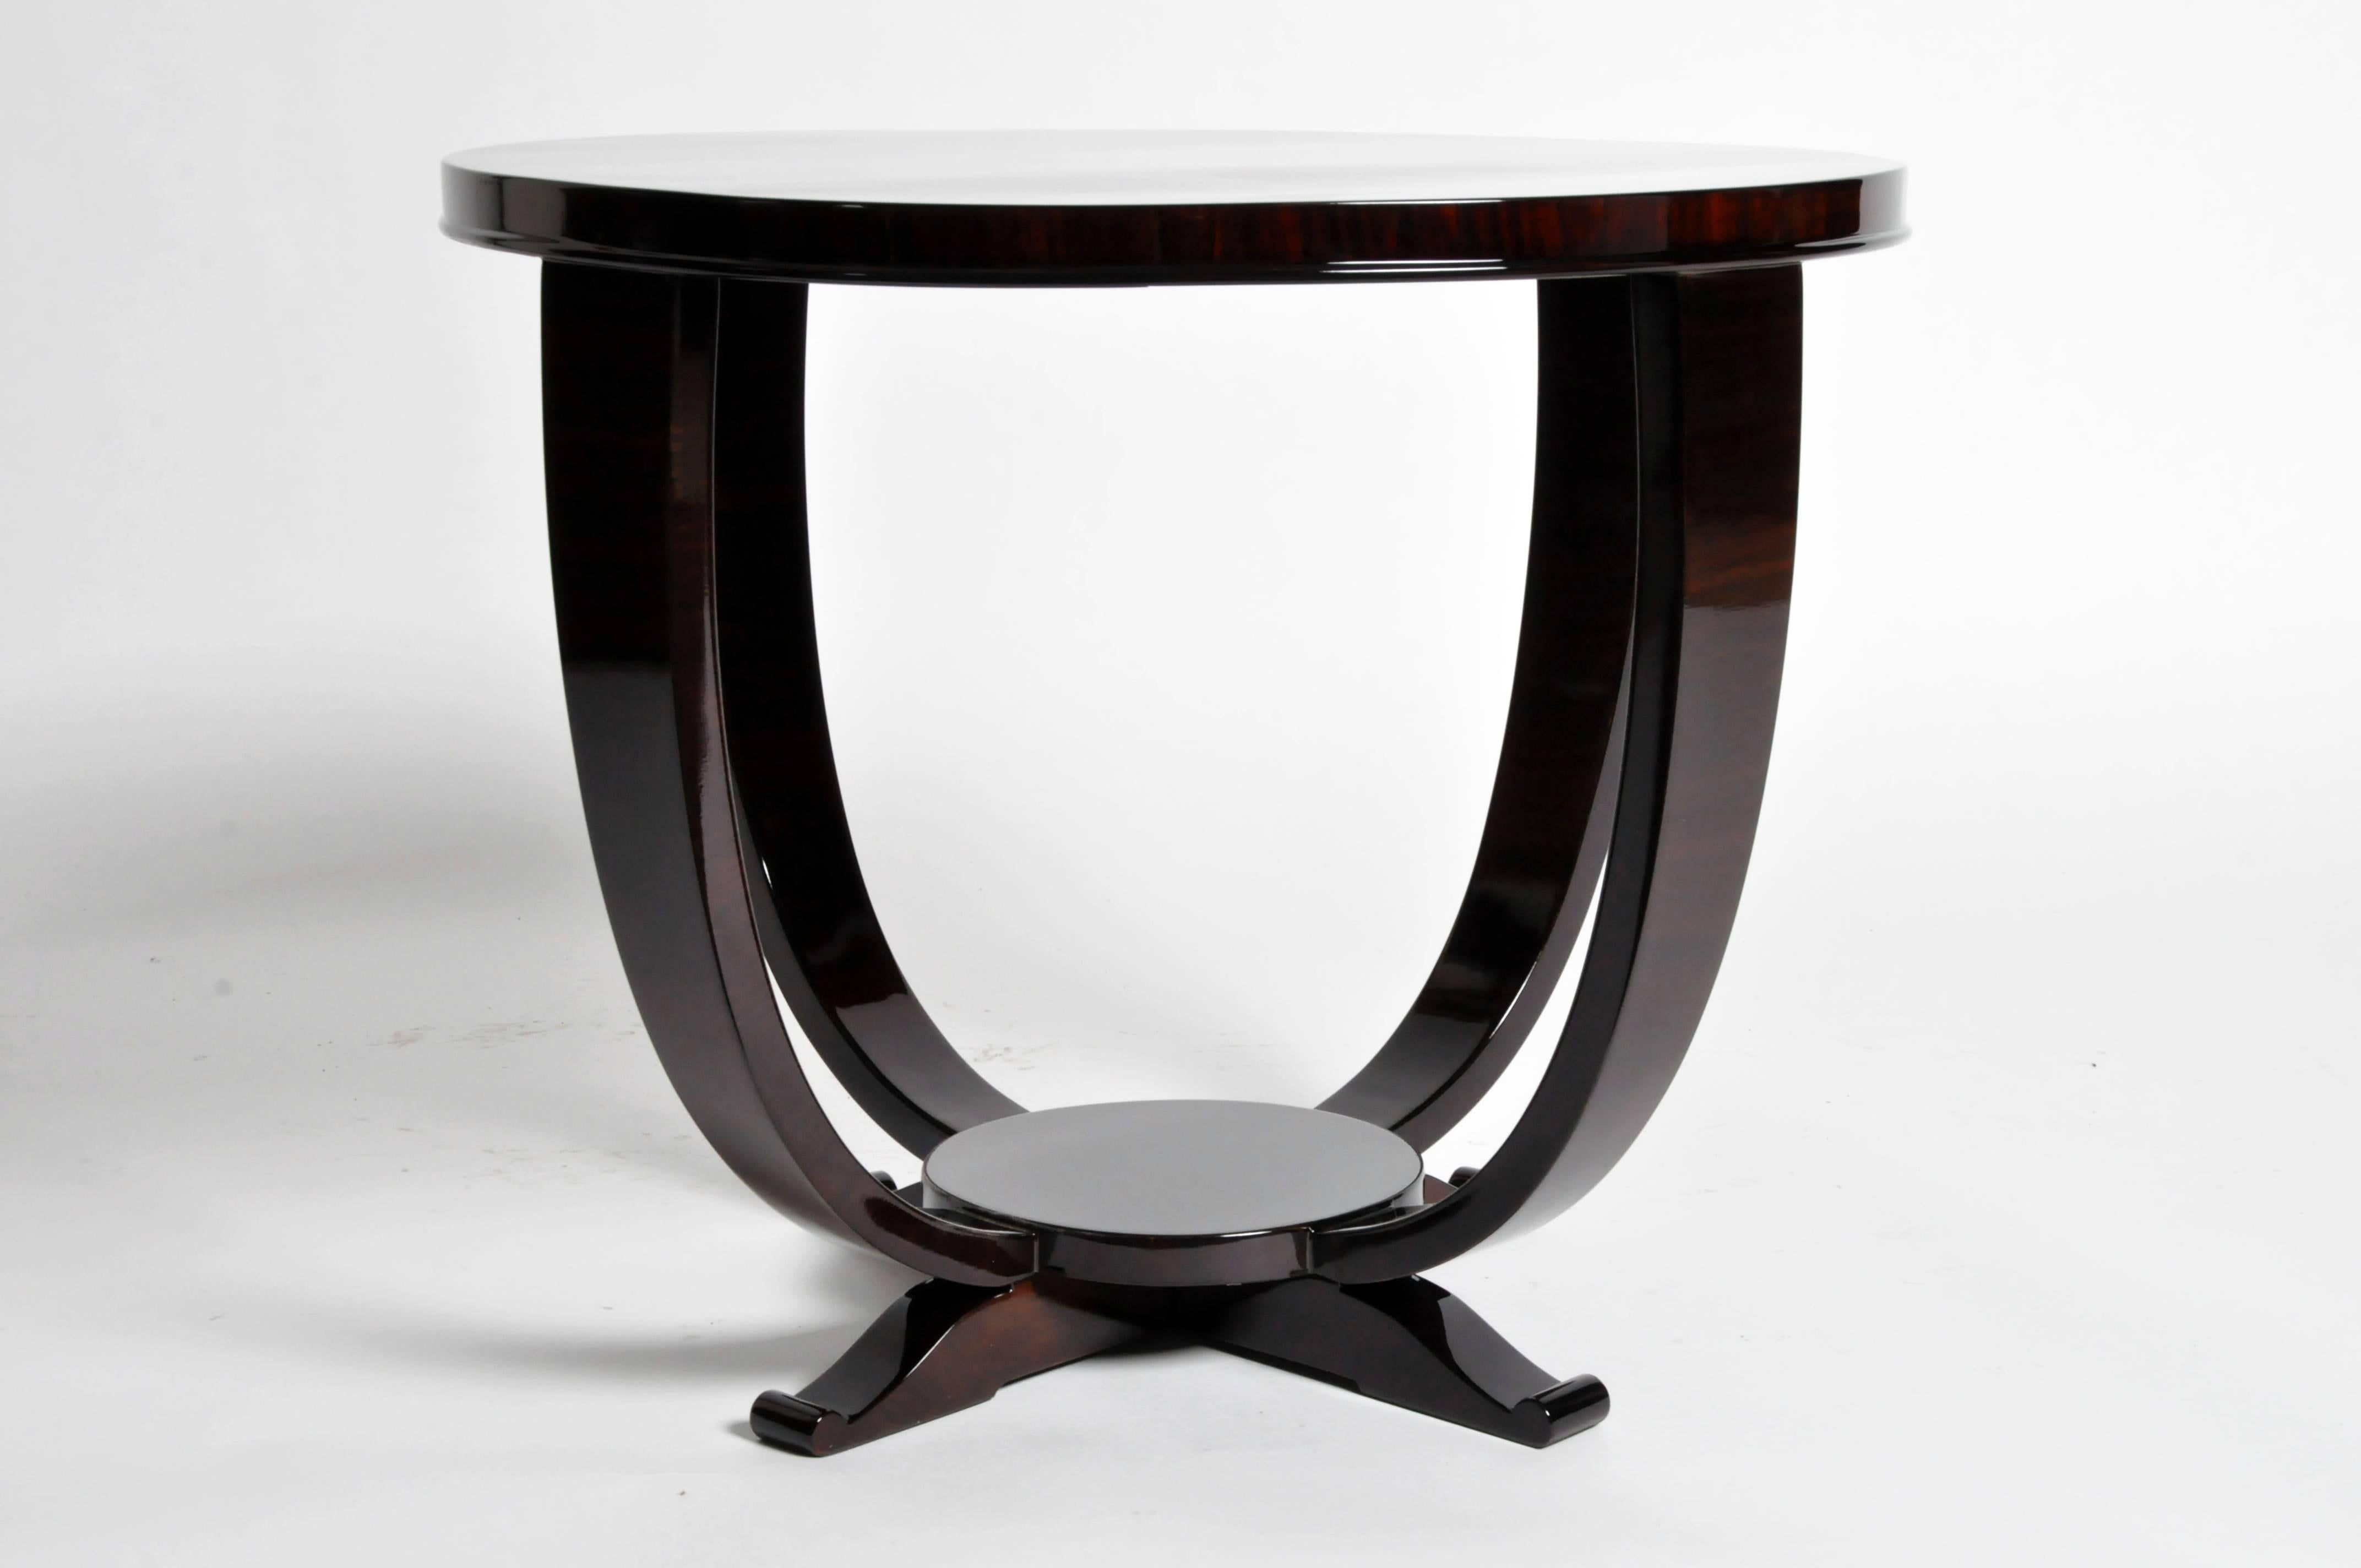 Hungarian Art Deco Style Round Table with Walnut Veneer